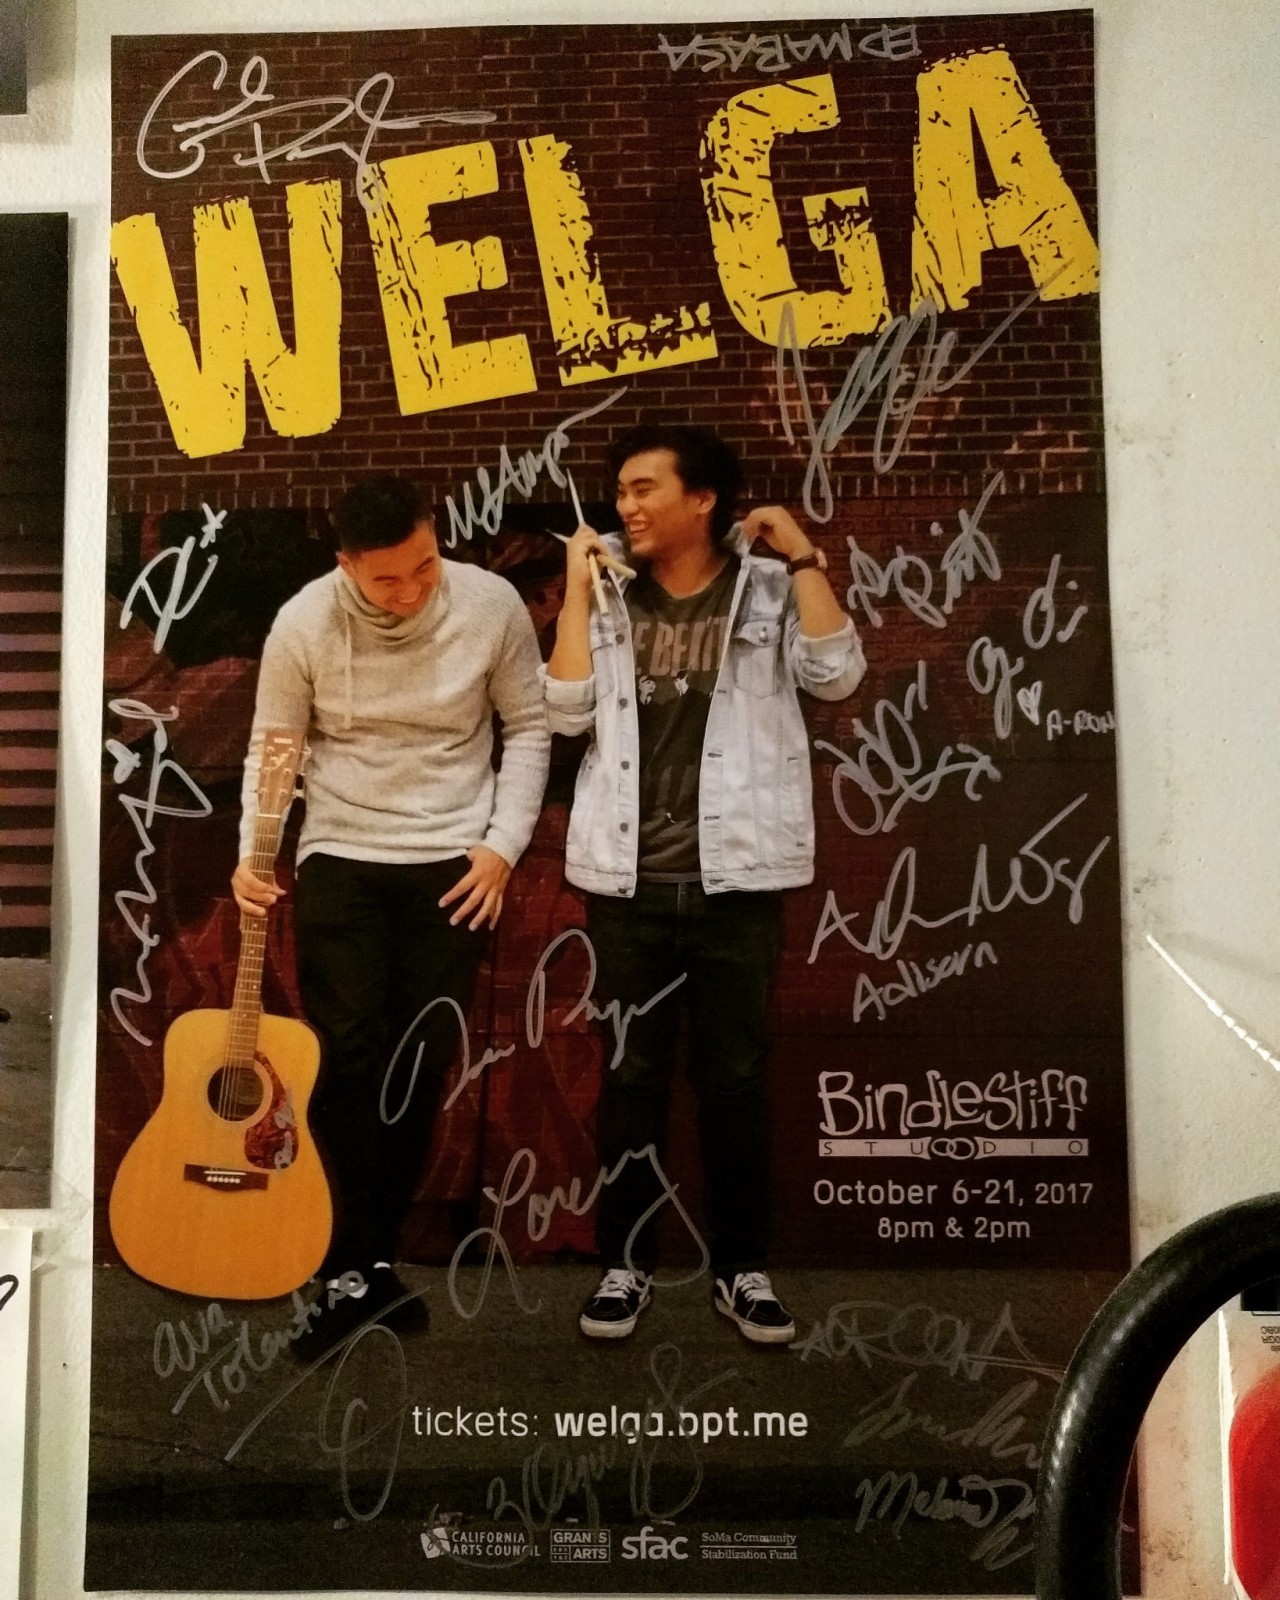 Pictured: A photo of my play's cast and crew autographed poster for WELGA which is currently posted inside the Bindlestiff Studio's Green Room.